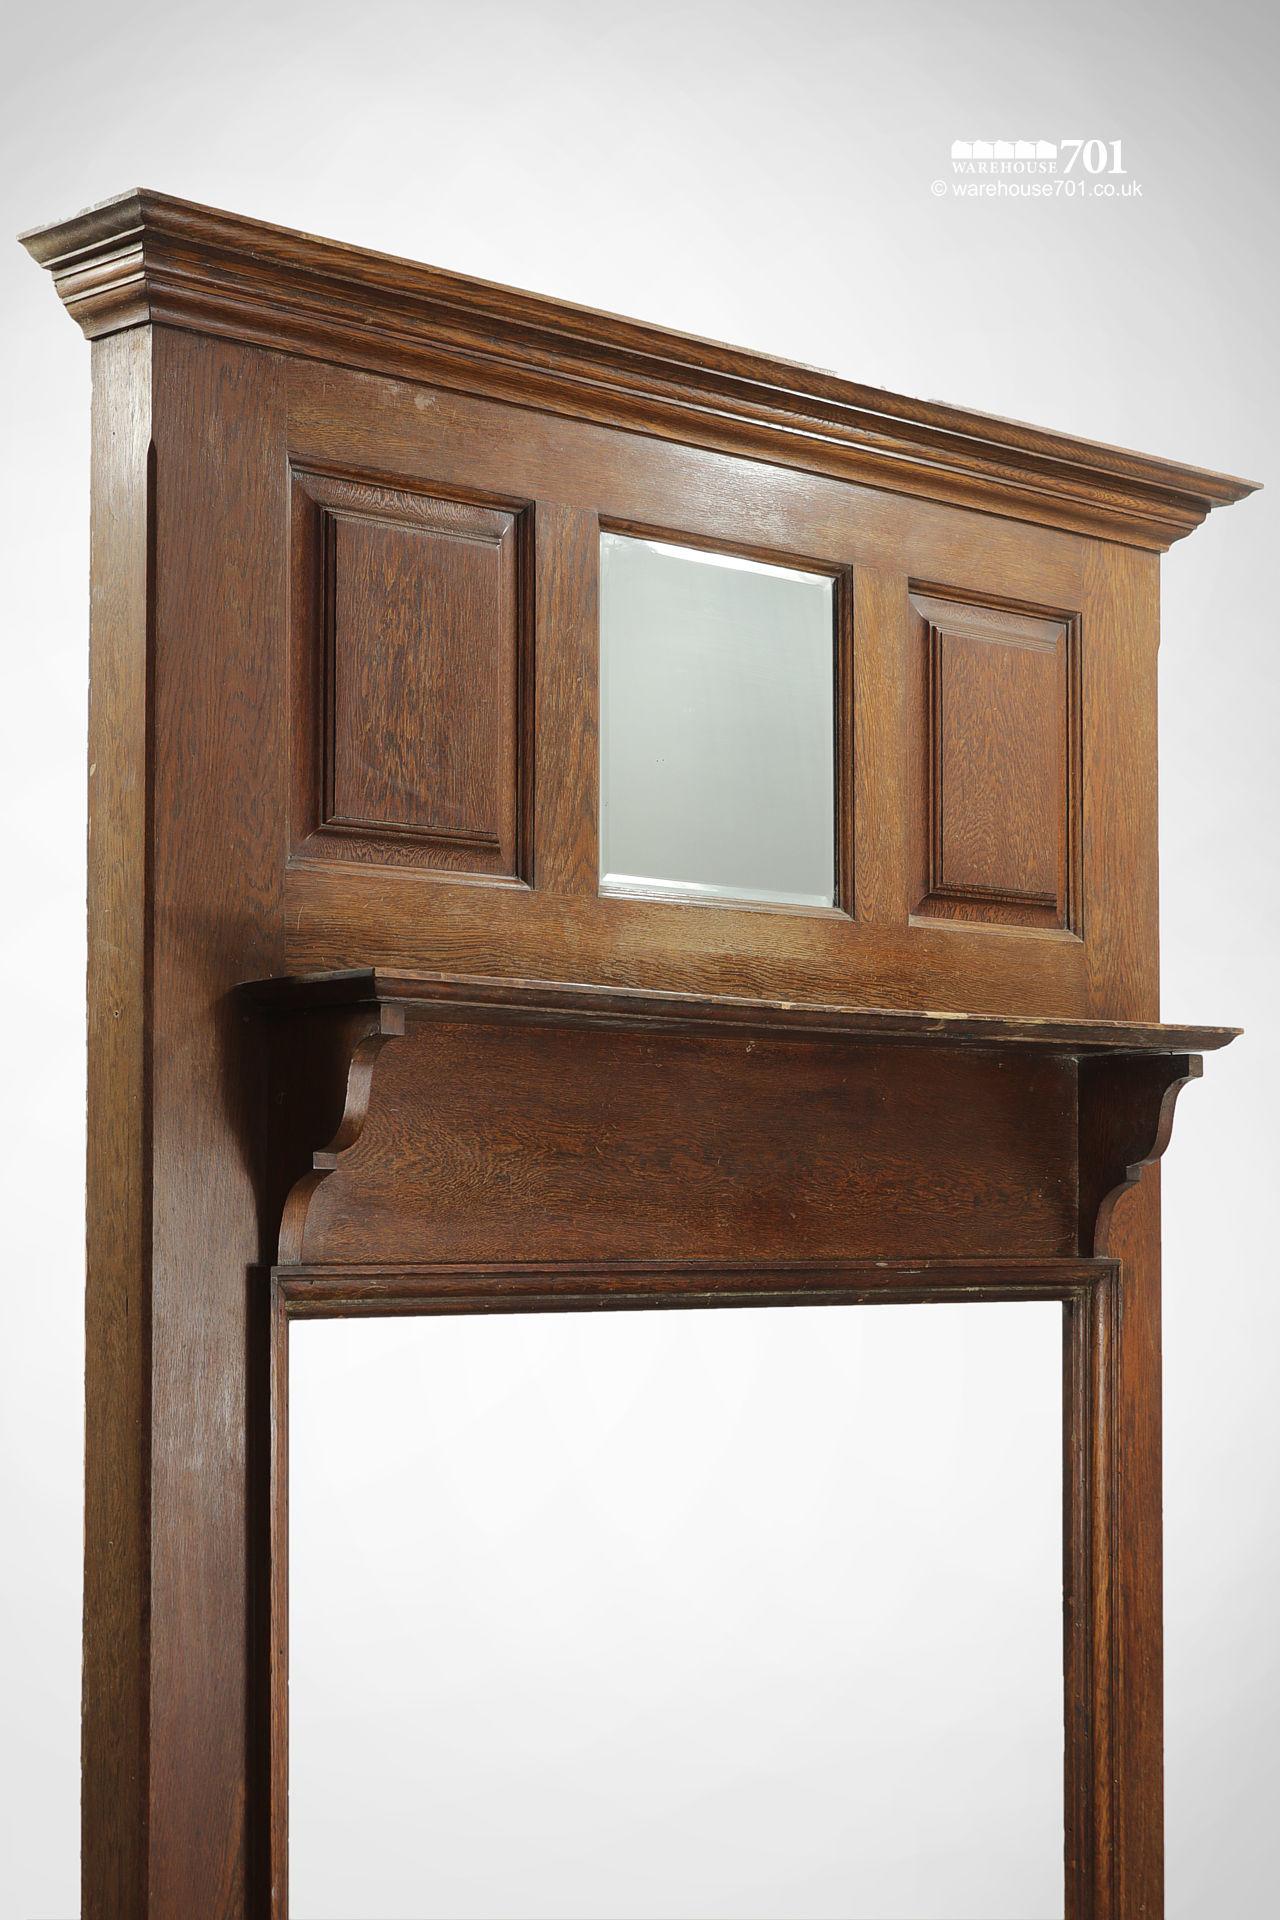 Salvaged Art Deco Oak Fire Surround, Antique Fireplace Surrounds With Mirror